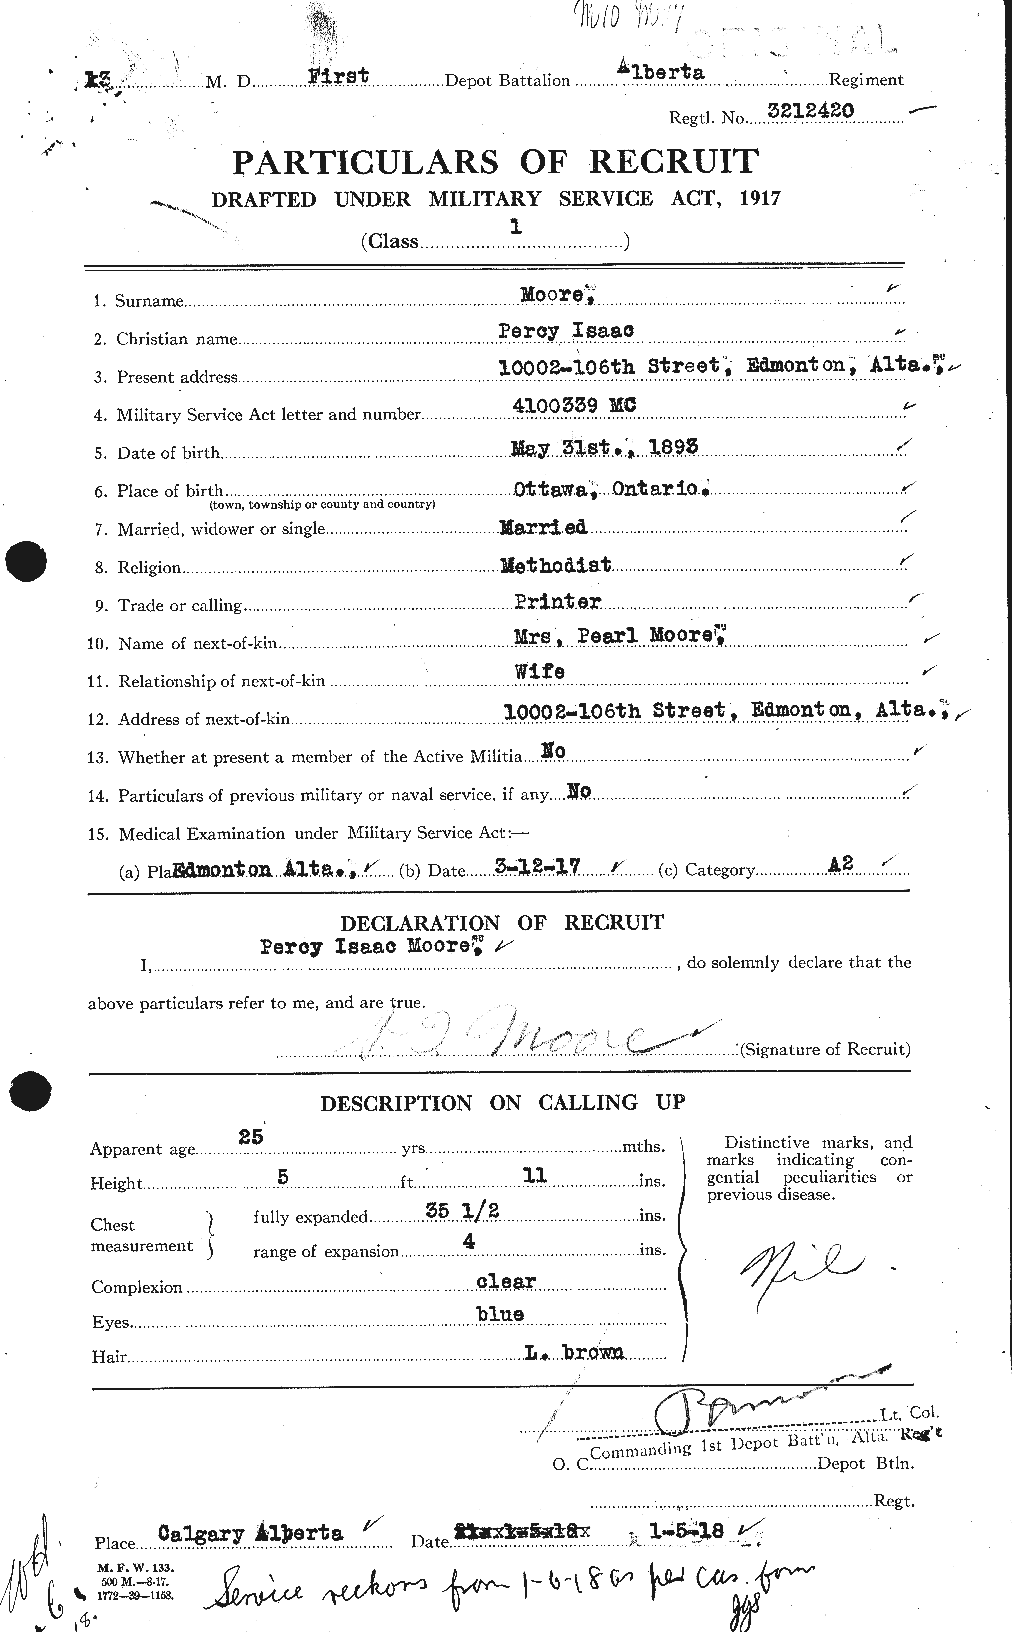 Personnel Records of the First World War - CEF 503490a